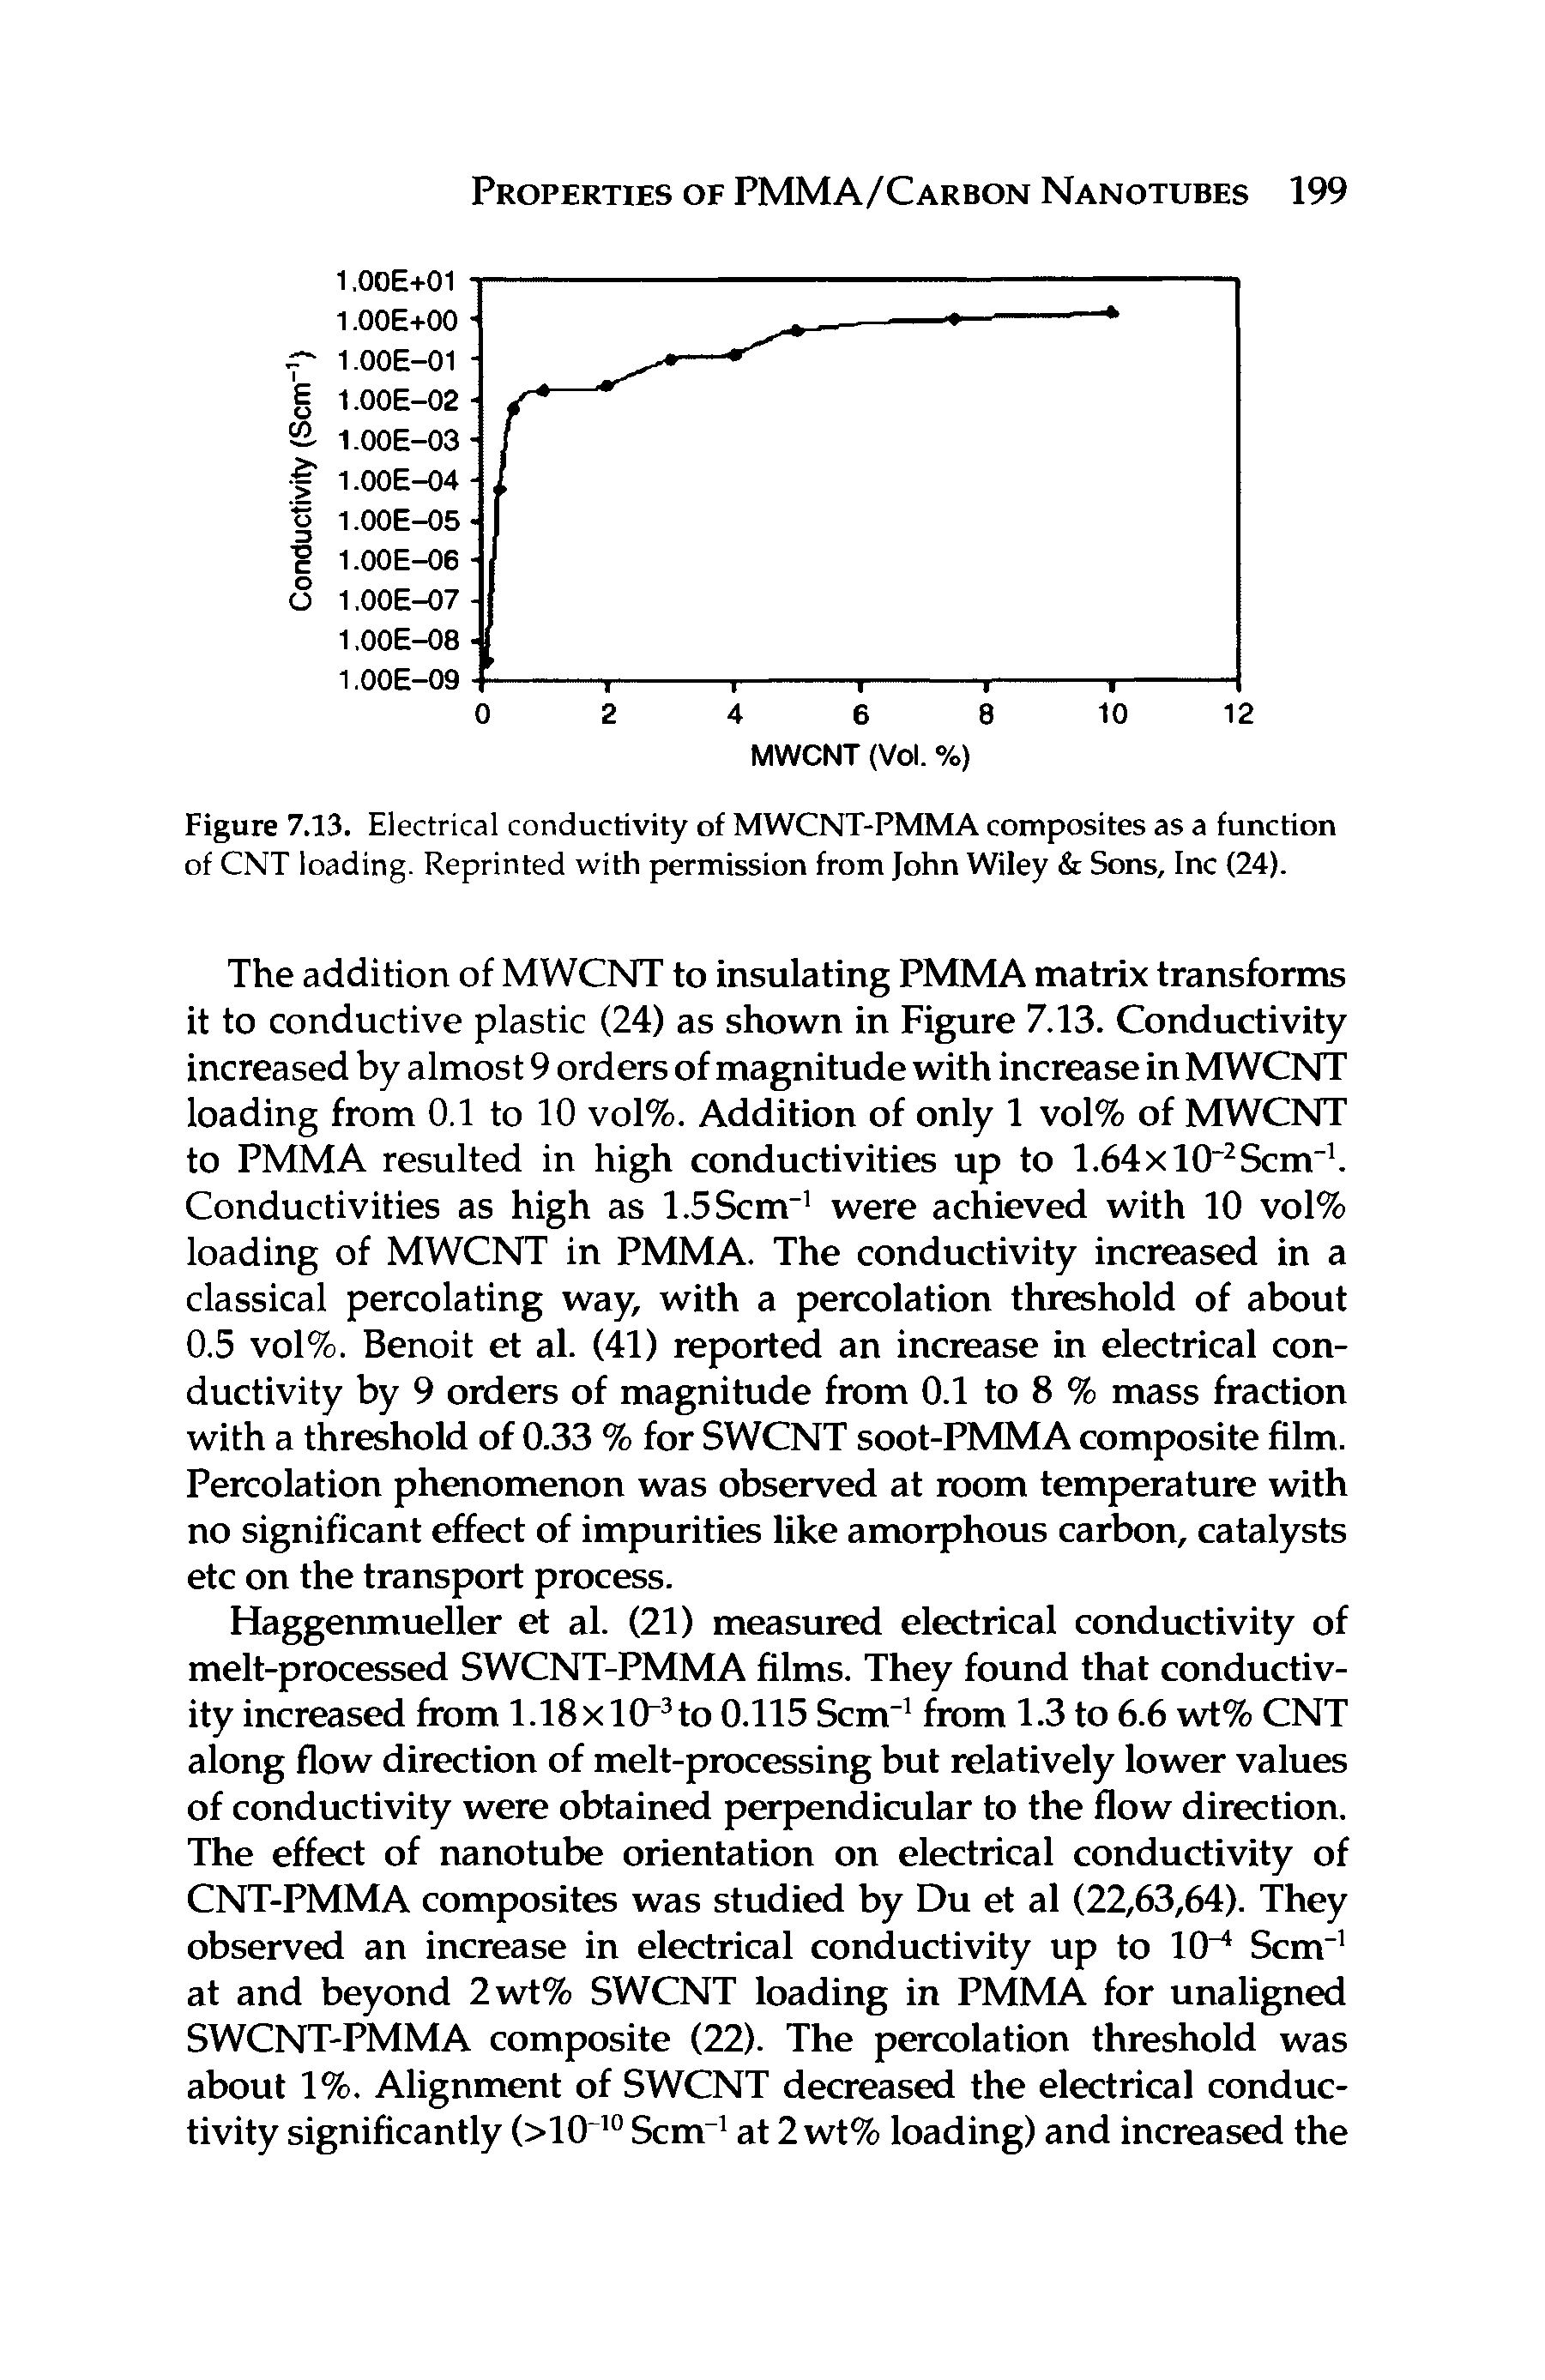 Figure 7.13. Electrical conductivity of MWCNT-PMMA composites as a function of CNT loading. Reprinted with permission from John Wiley Sons, Inc (24).